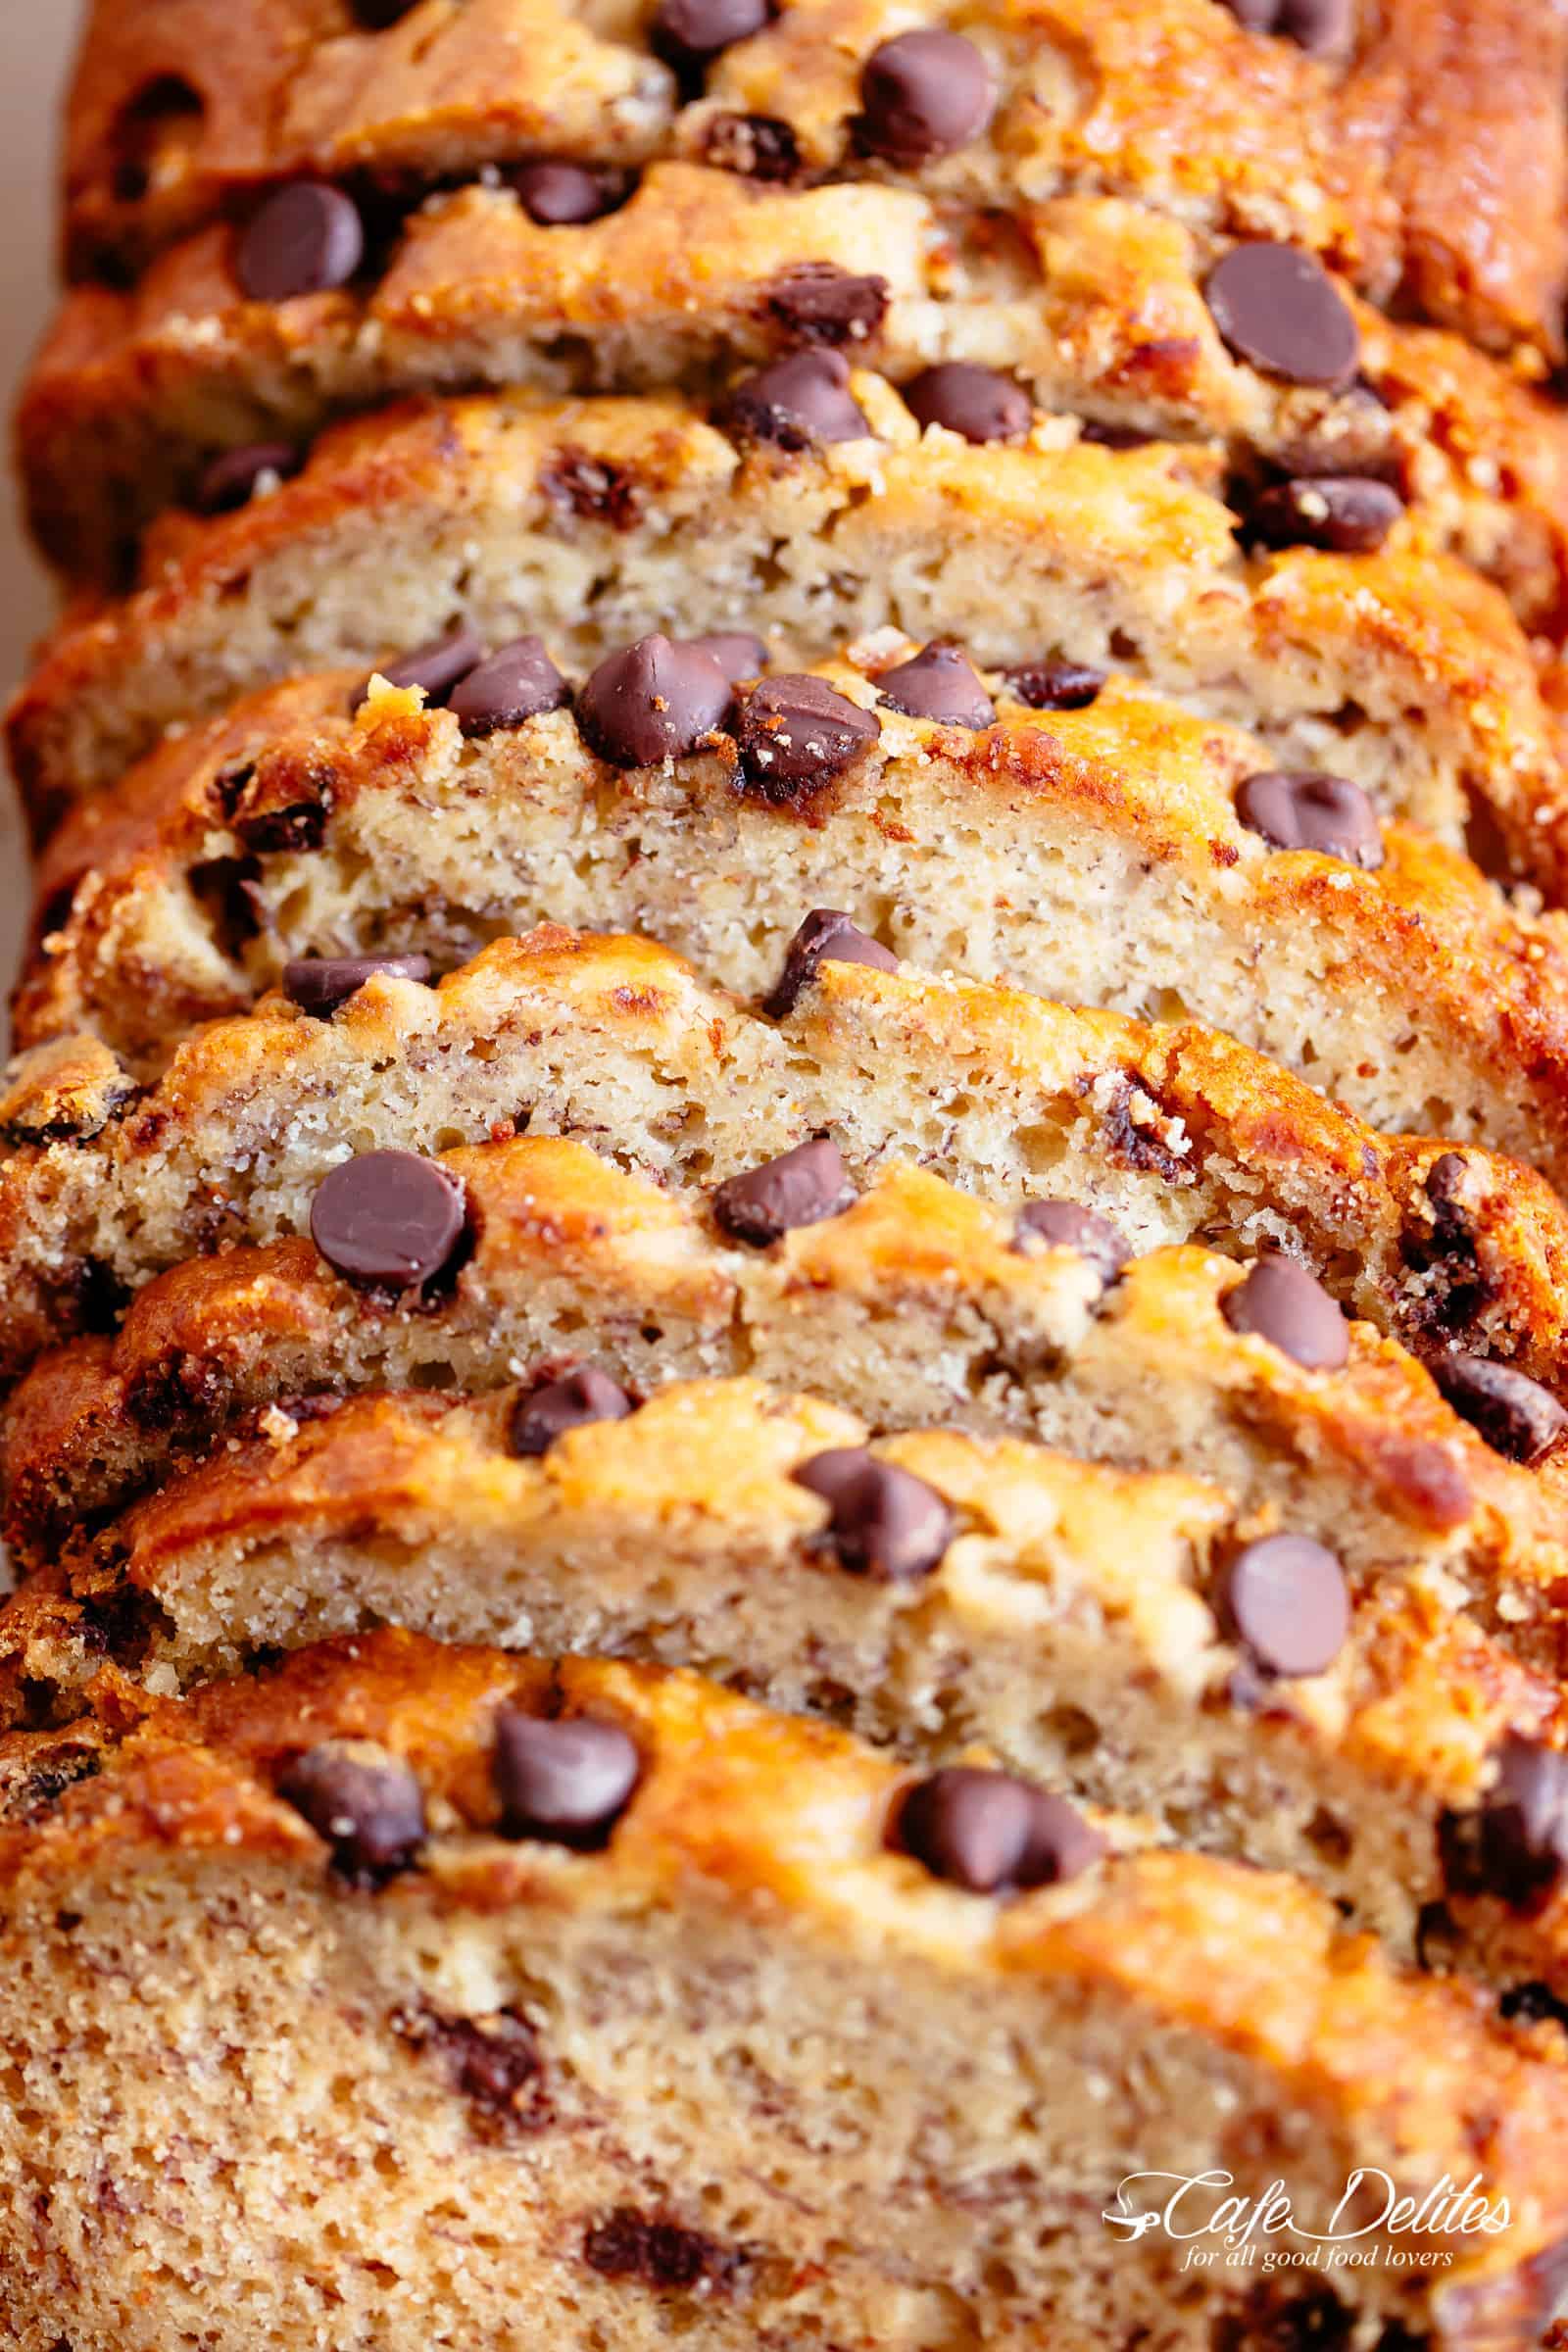 The Best Fluffy Banana Bread with chocolate chips or chopped nuts is not only the best way to use up over-ripe bananas, but it's possibly the best slice to go with your morning coffee! Better than anything store-bought, our banana bread is buttery, moist and smells amazing while baking! Every bite is pure heaven! | cafedelites.com